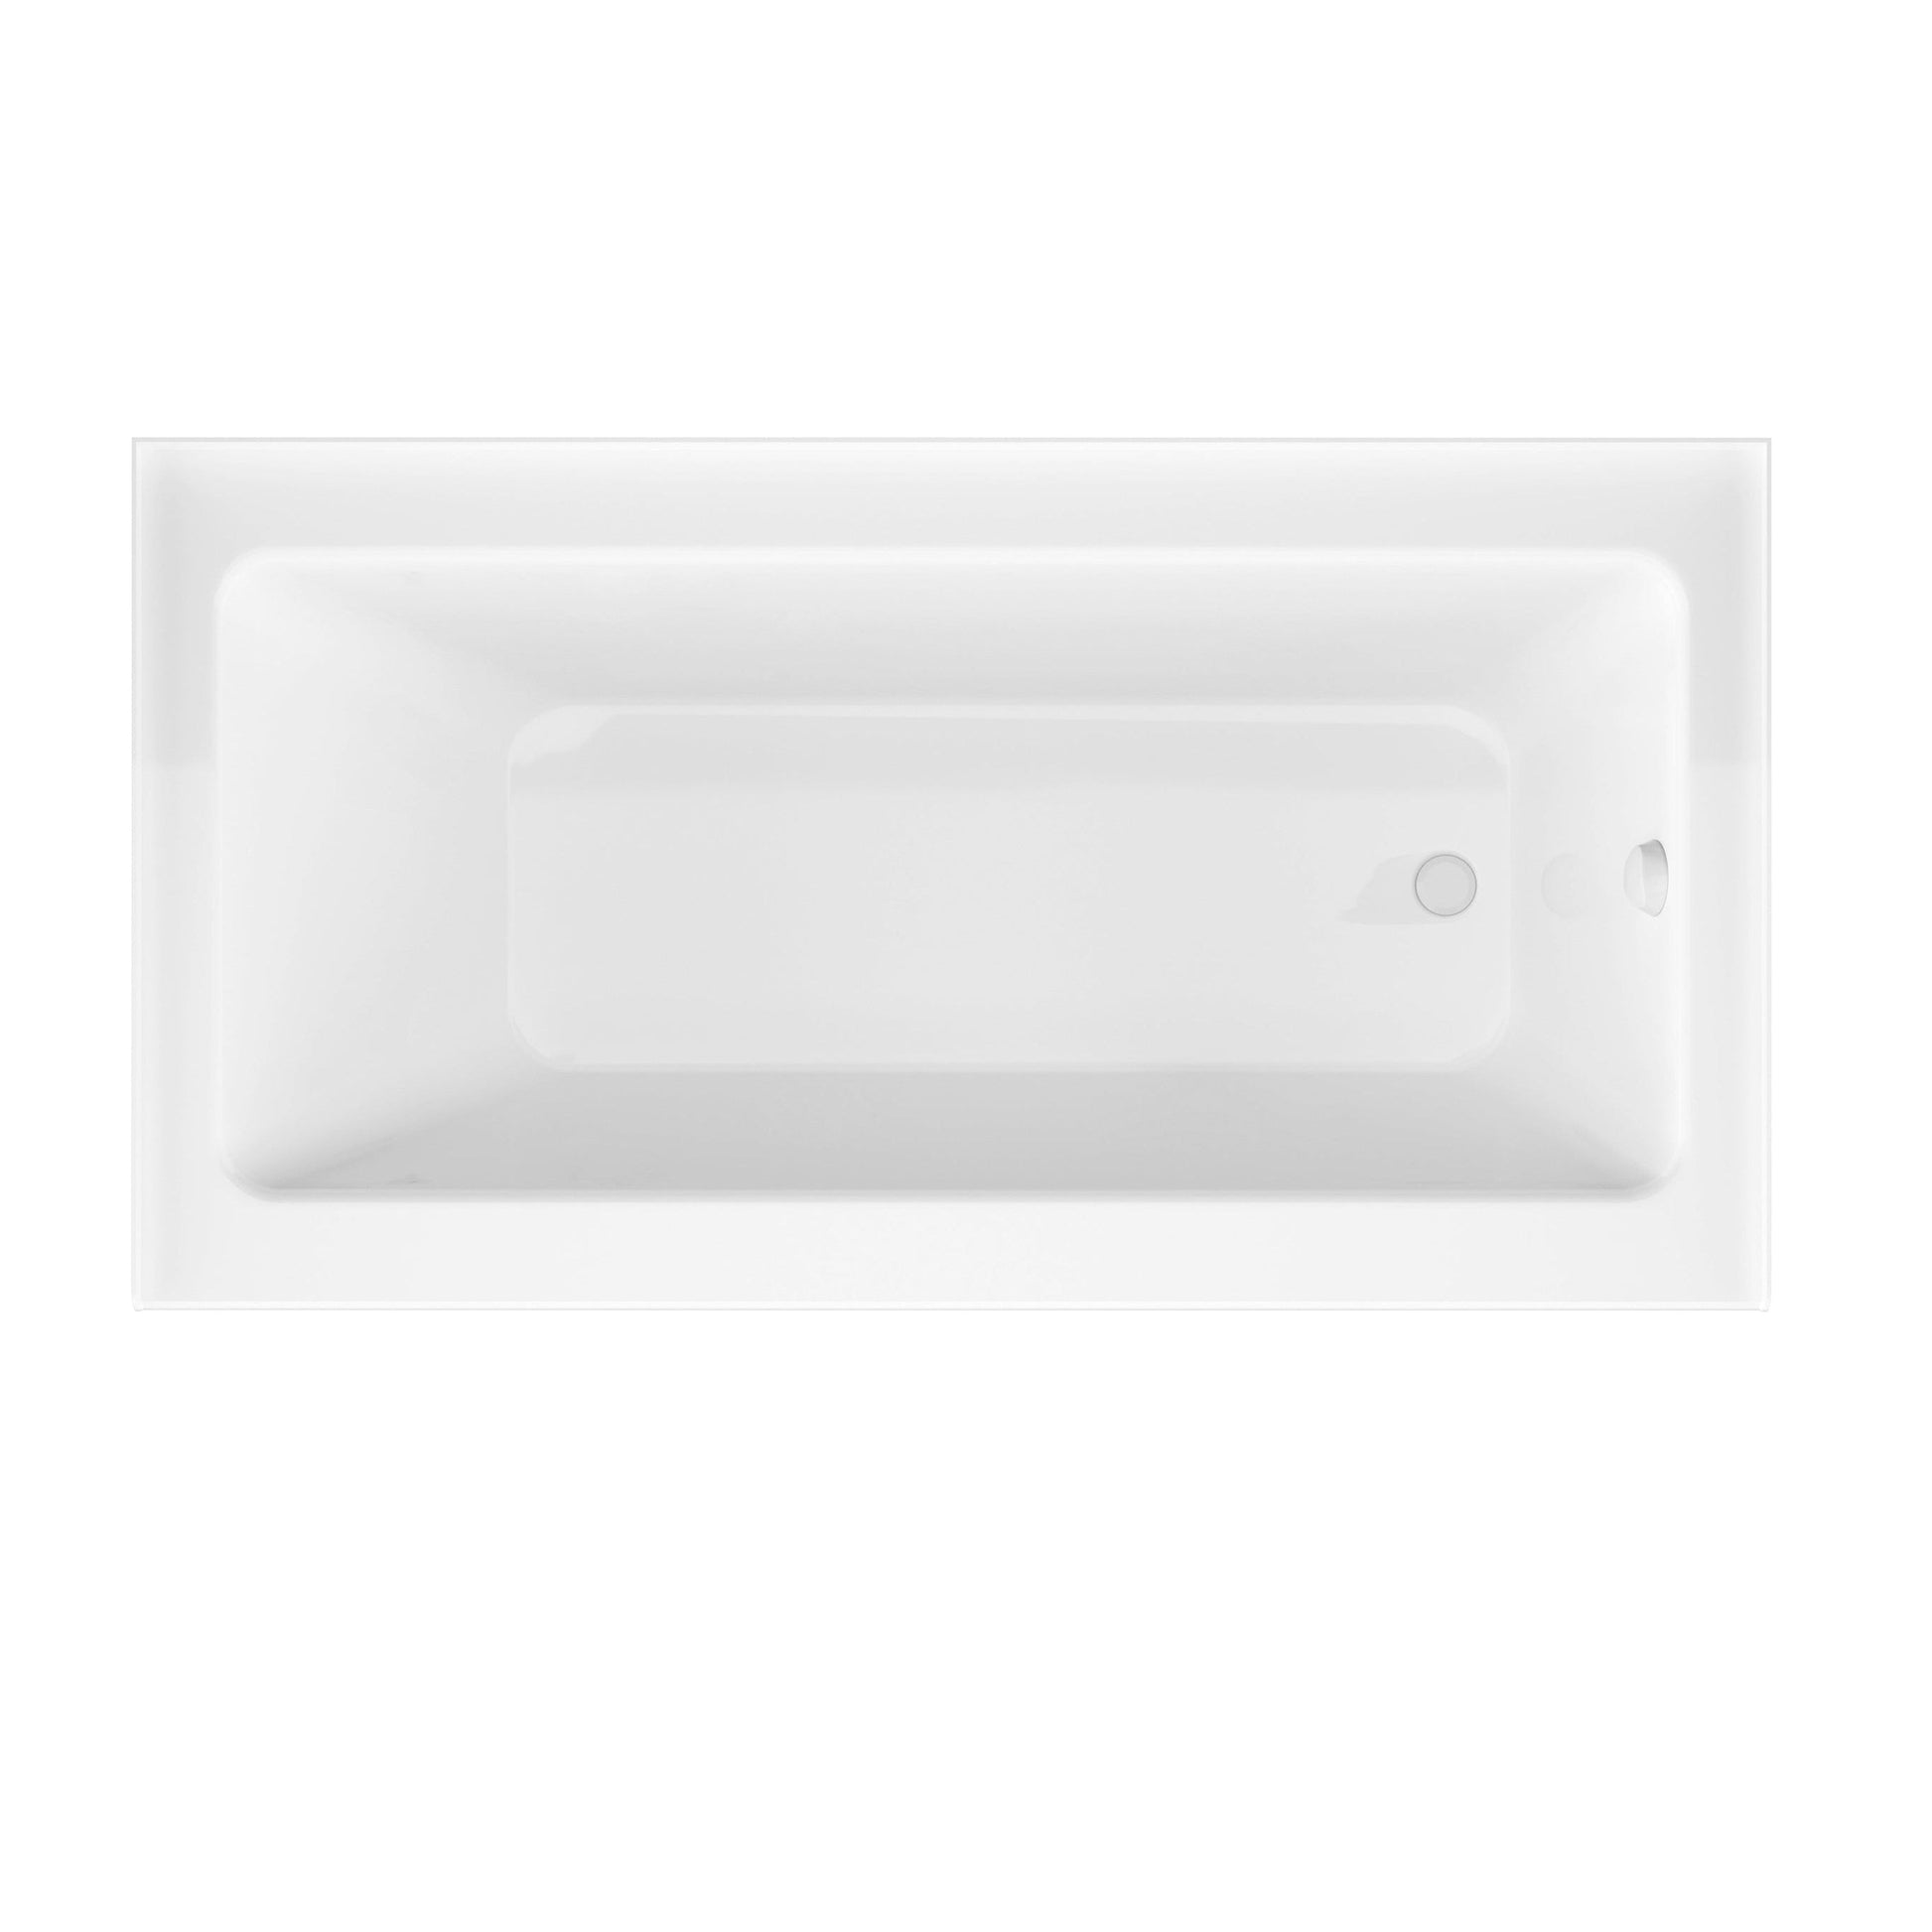 ANZZI Galleon Series White "60 x 32" Alcove Right Drain Rectangular Bathtub With Built-In Flange and Frameless Polished Chrome Hinged Door